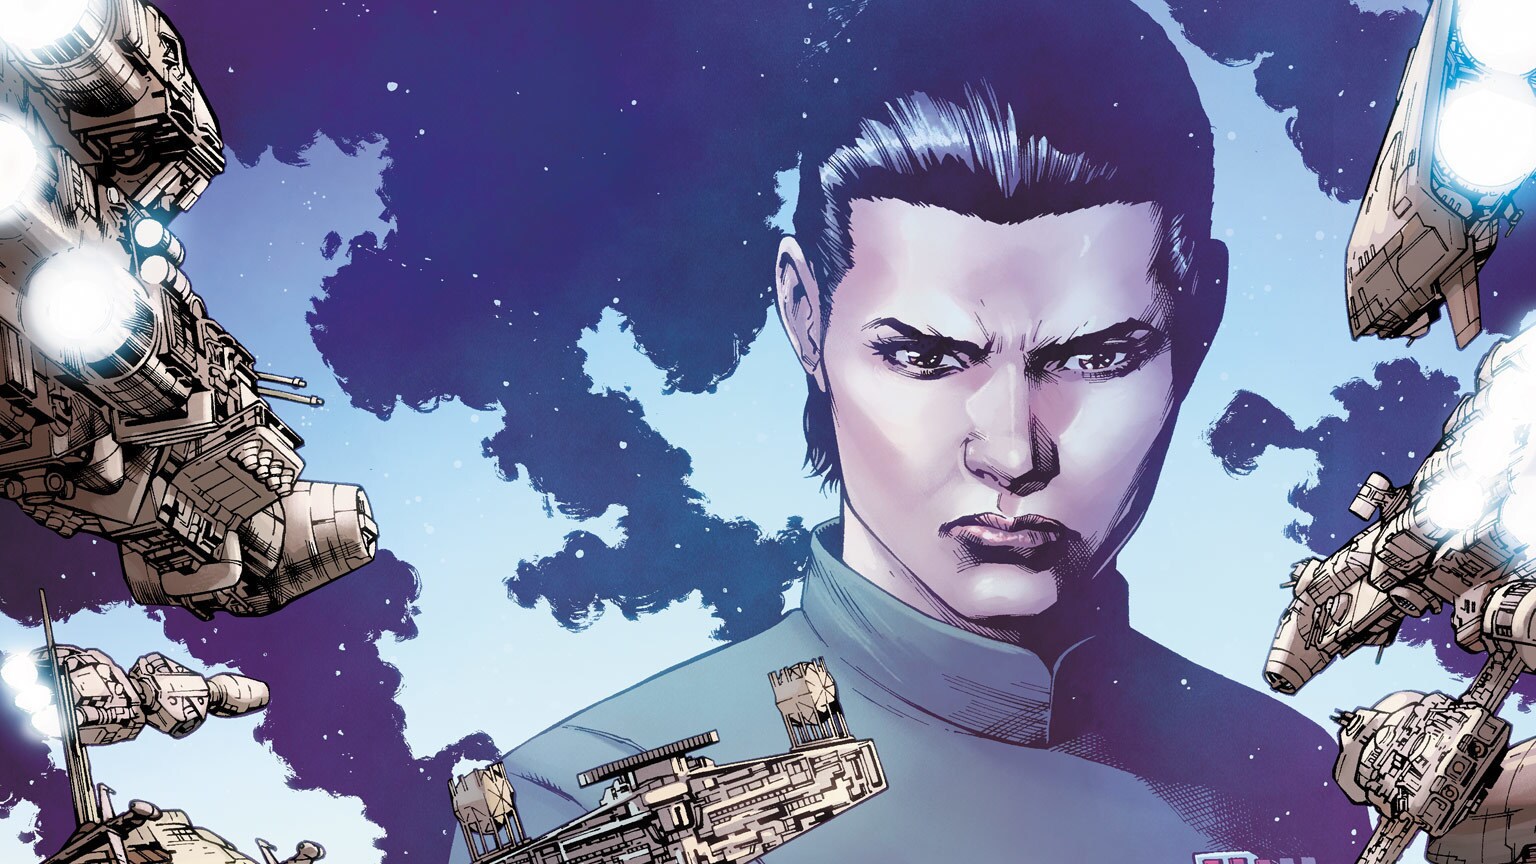 Commander Zahra Wants Revenge in Marvel’s Star Wars #23 - Exclusive Preview